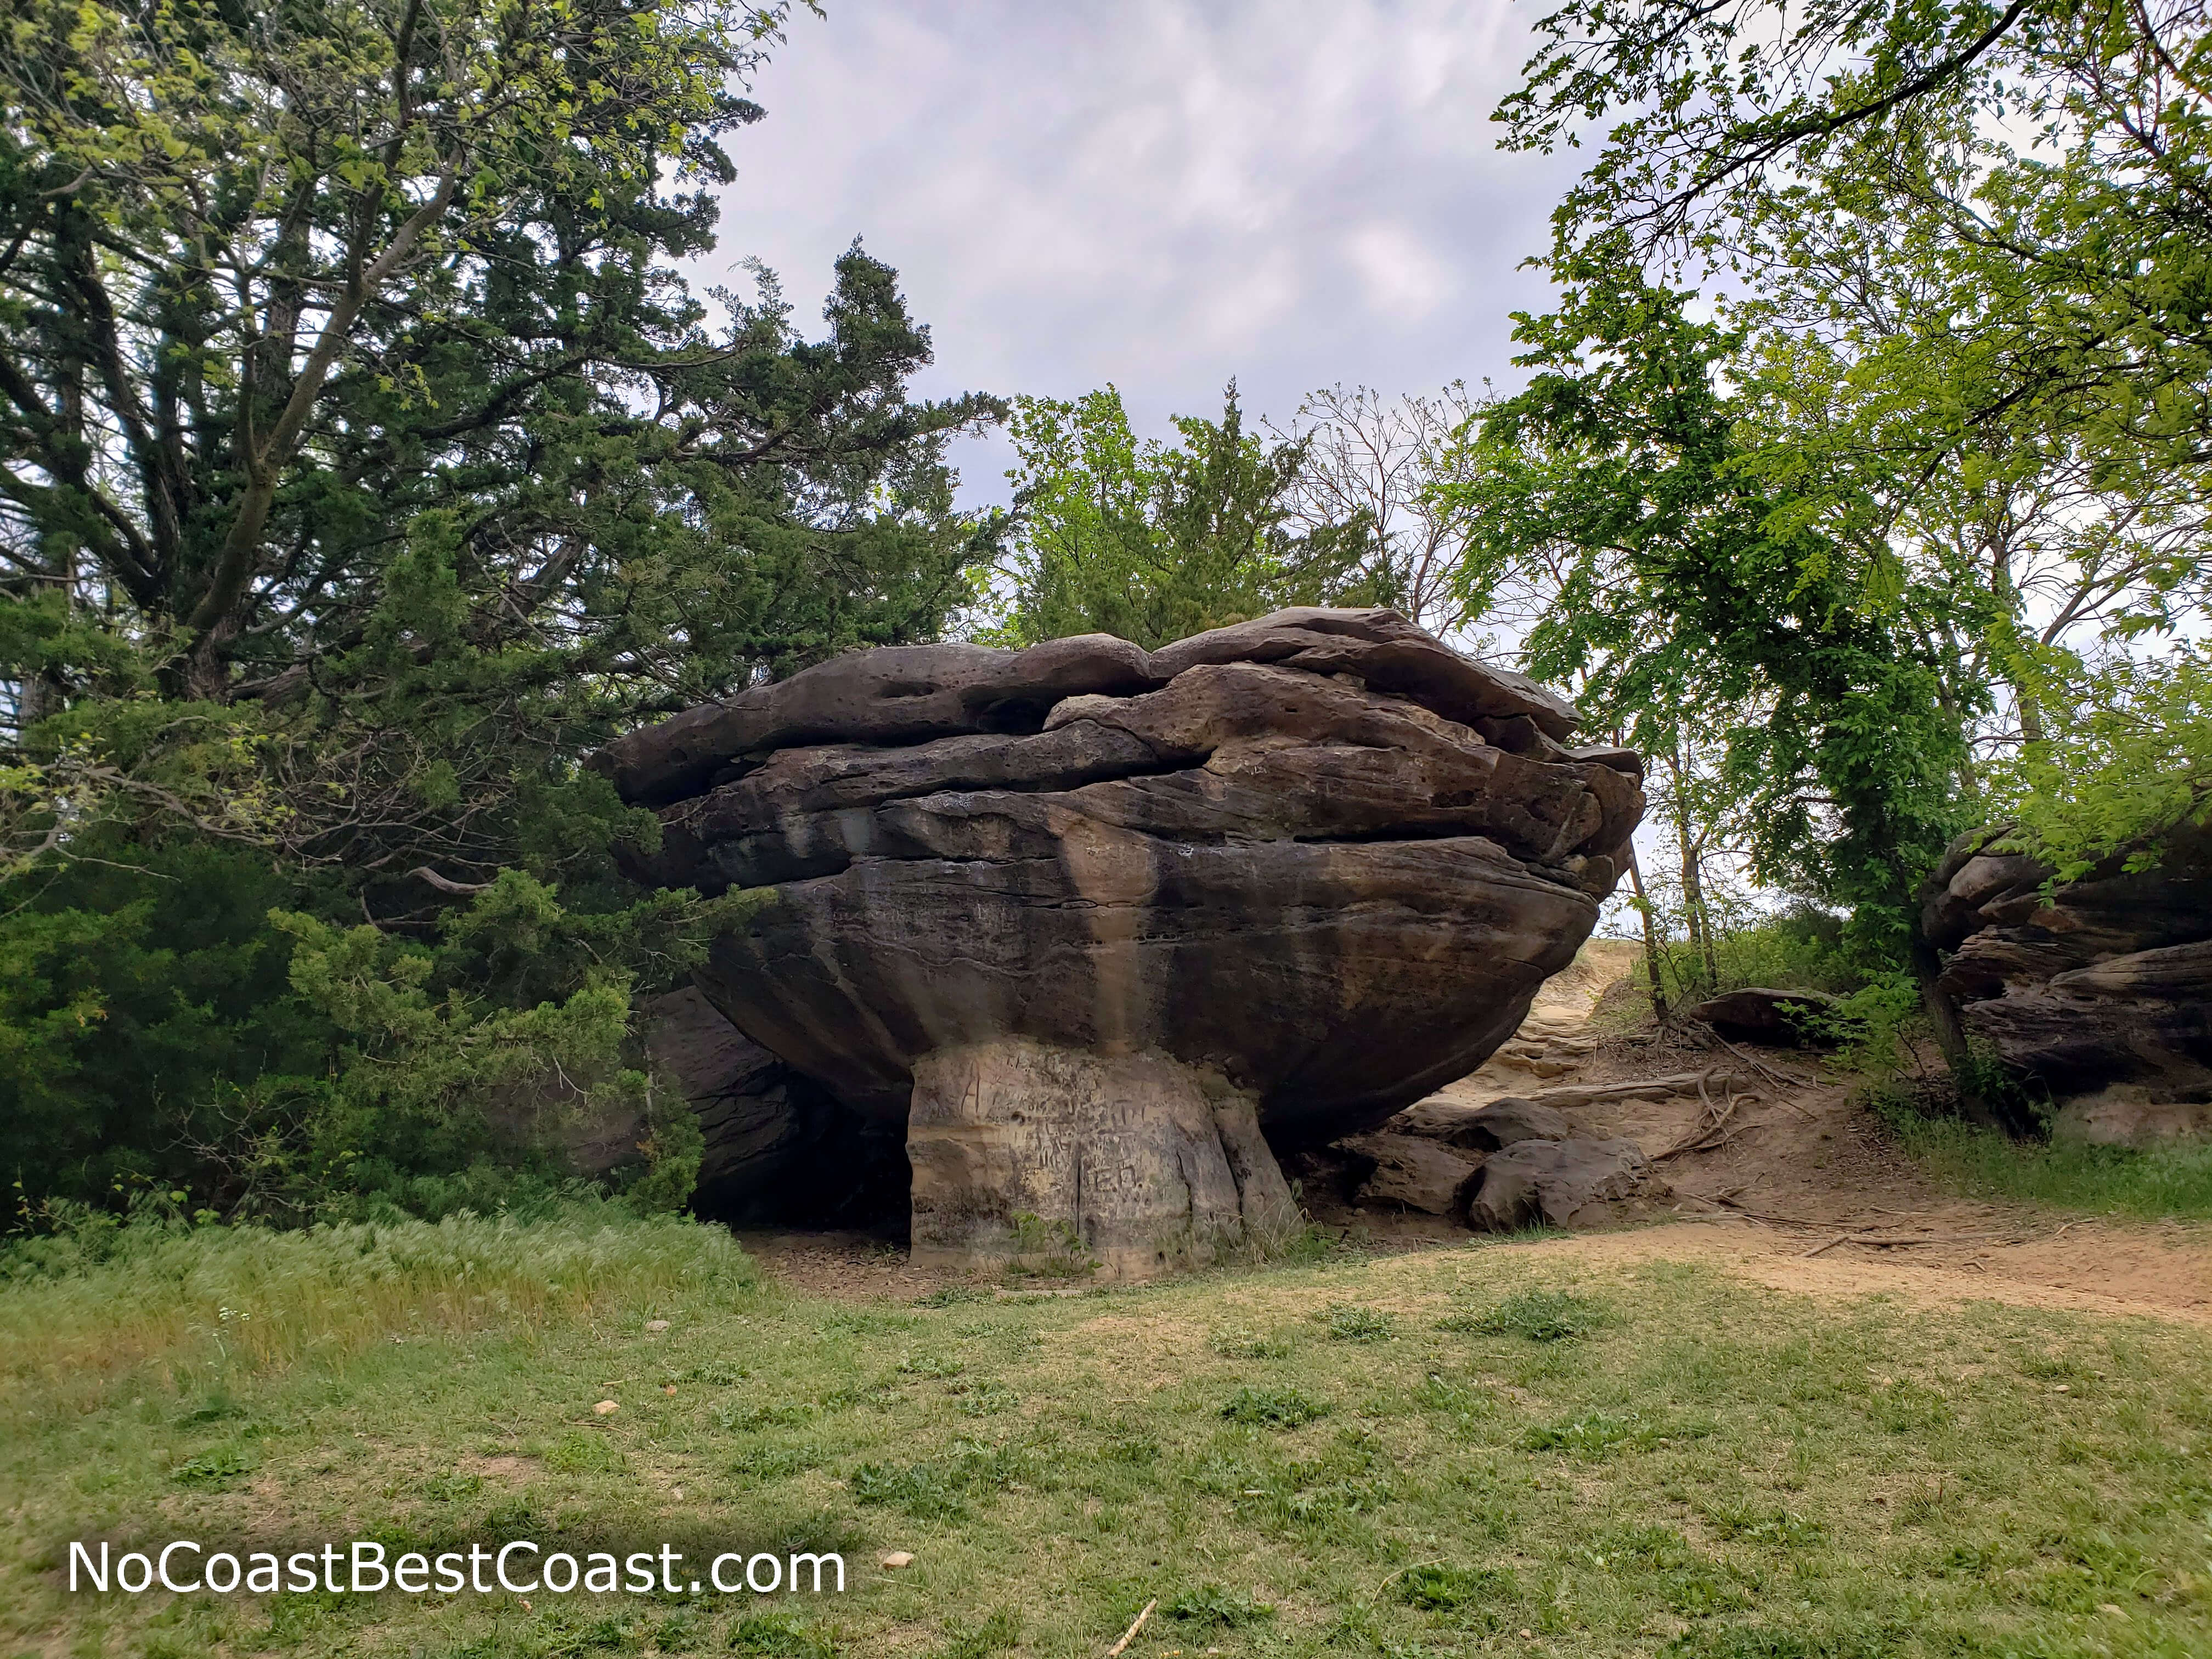 This rock reminds me of a clam